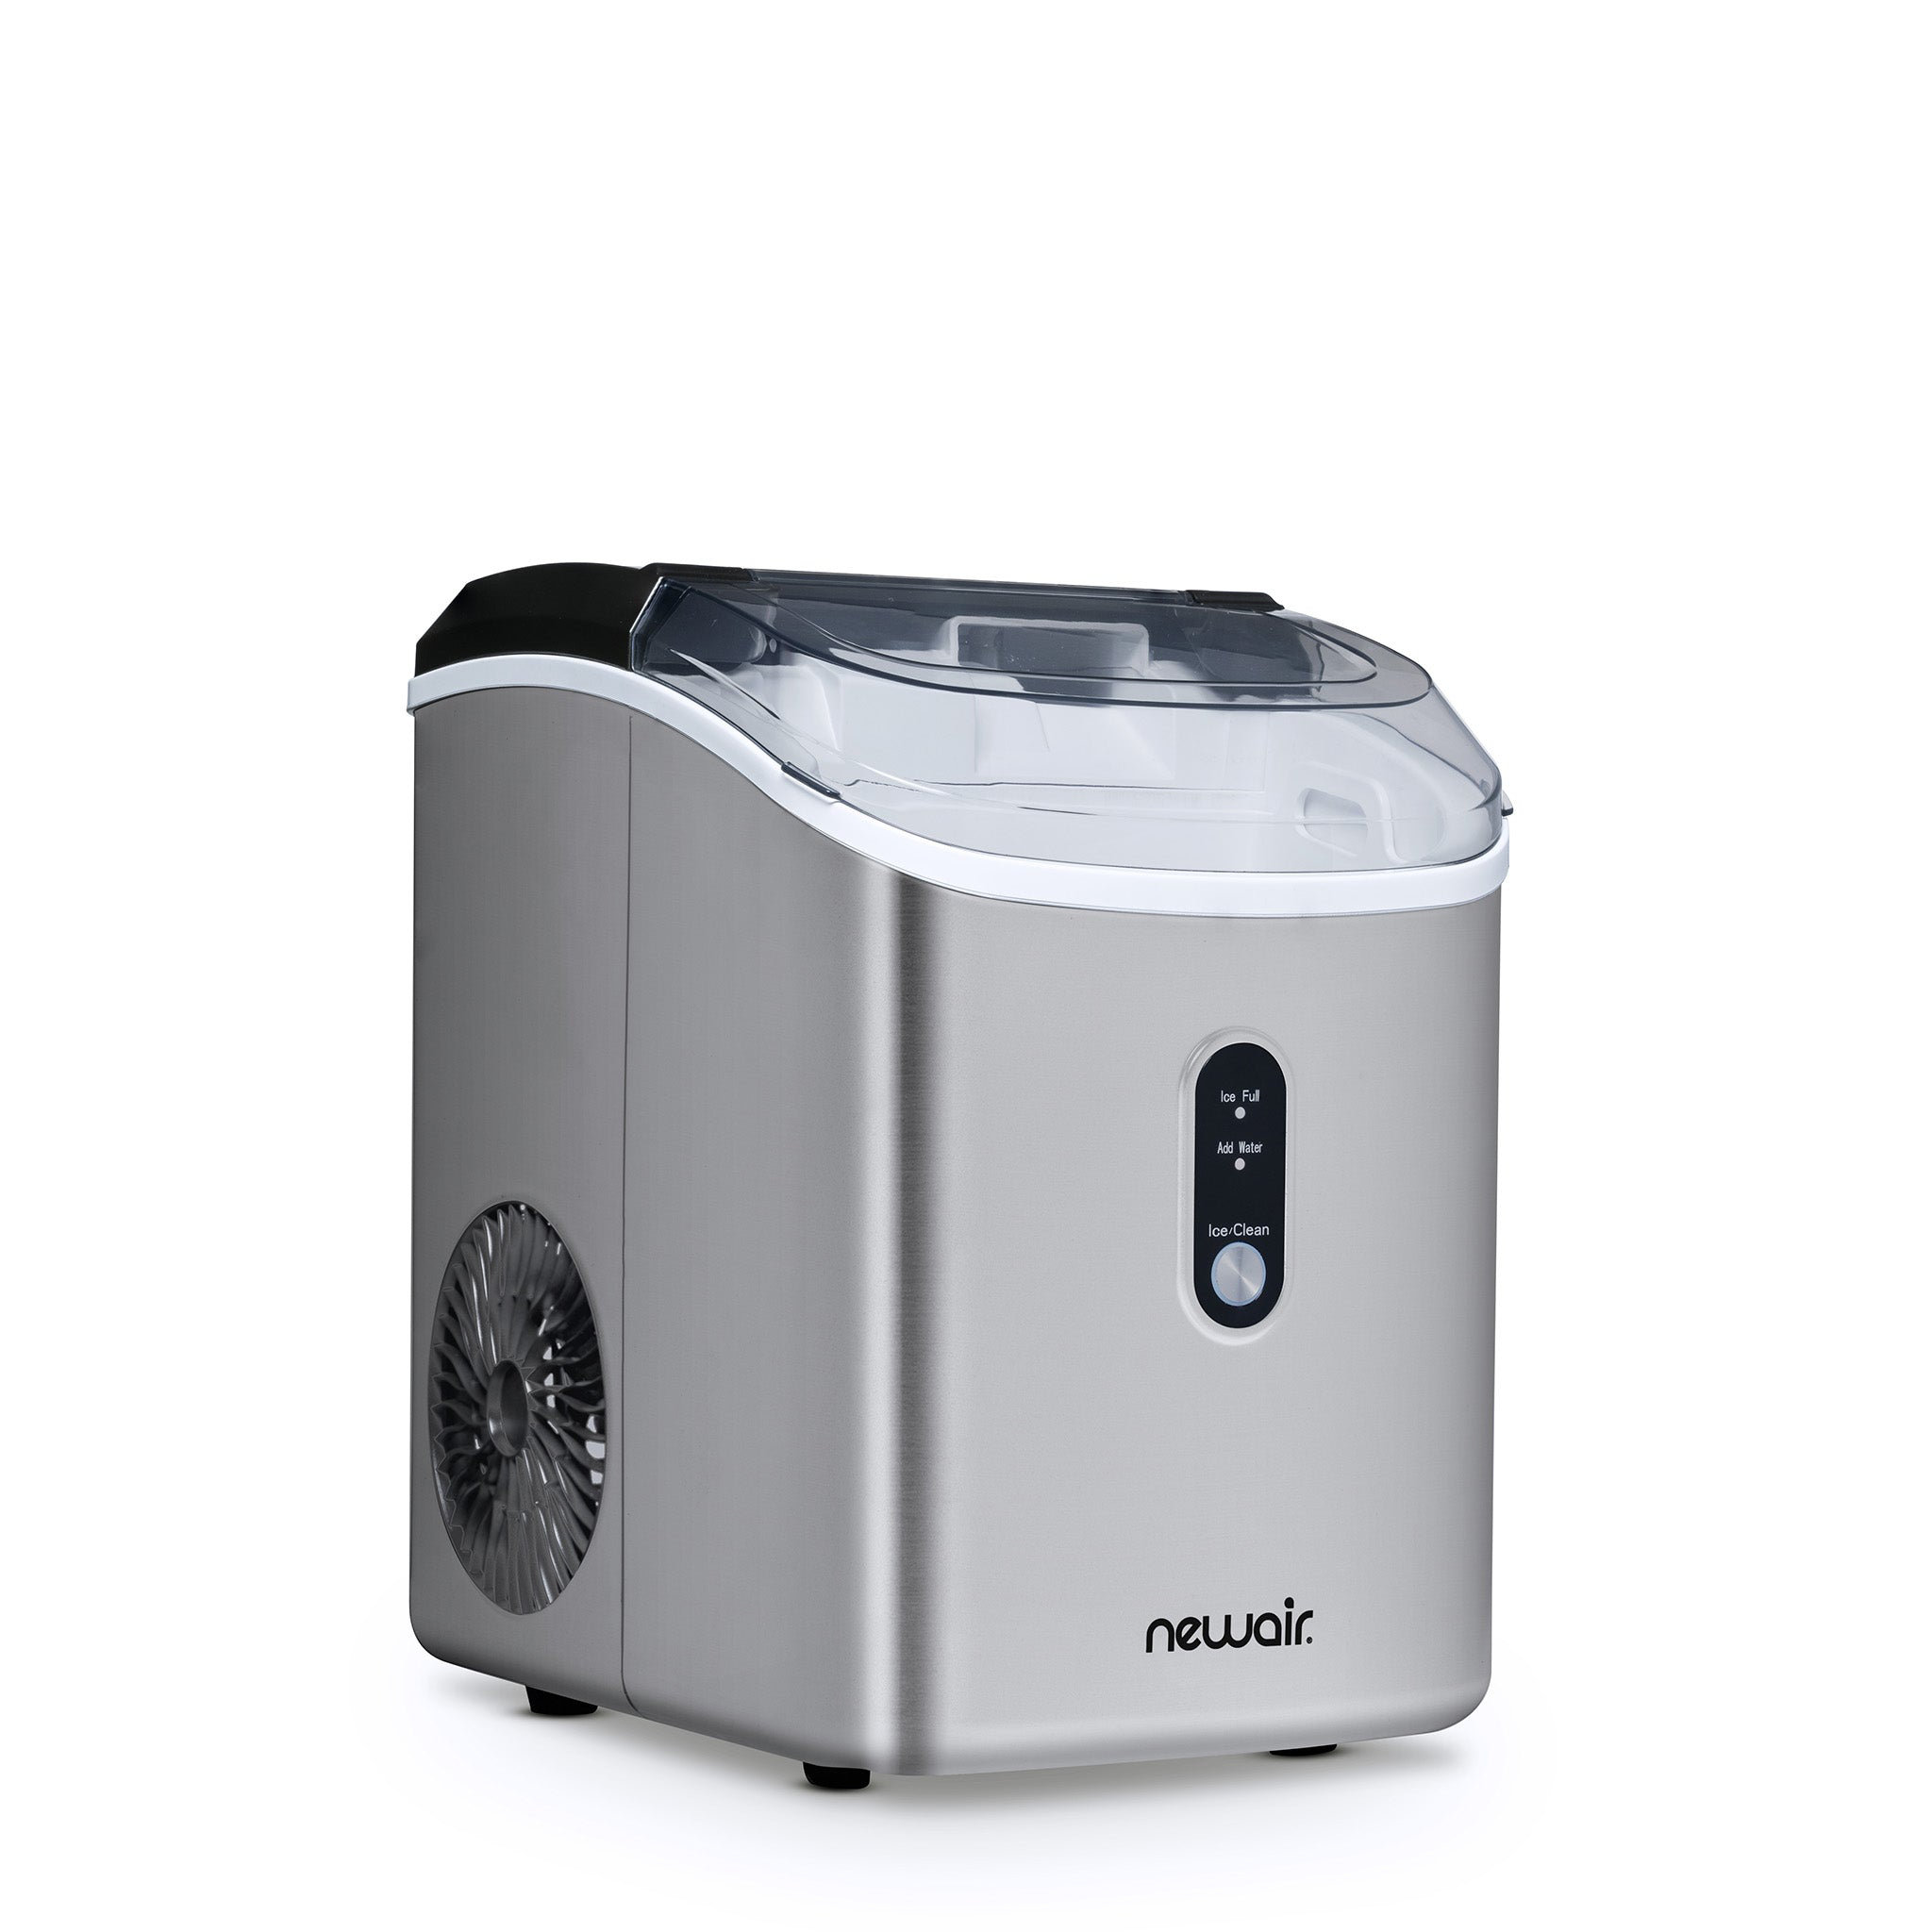  COWSAR Nugget Ice Maker Countertop, Chewable Pebble